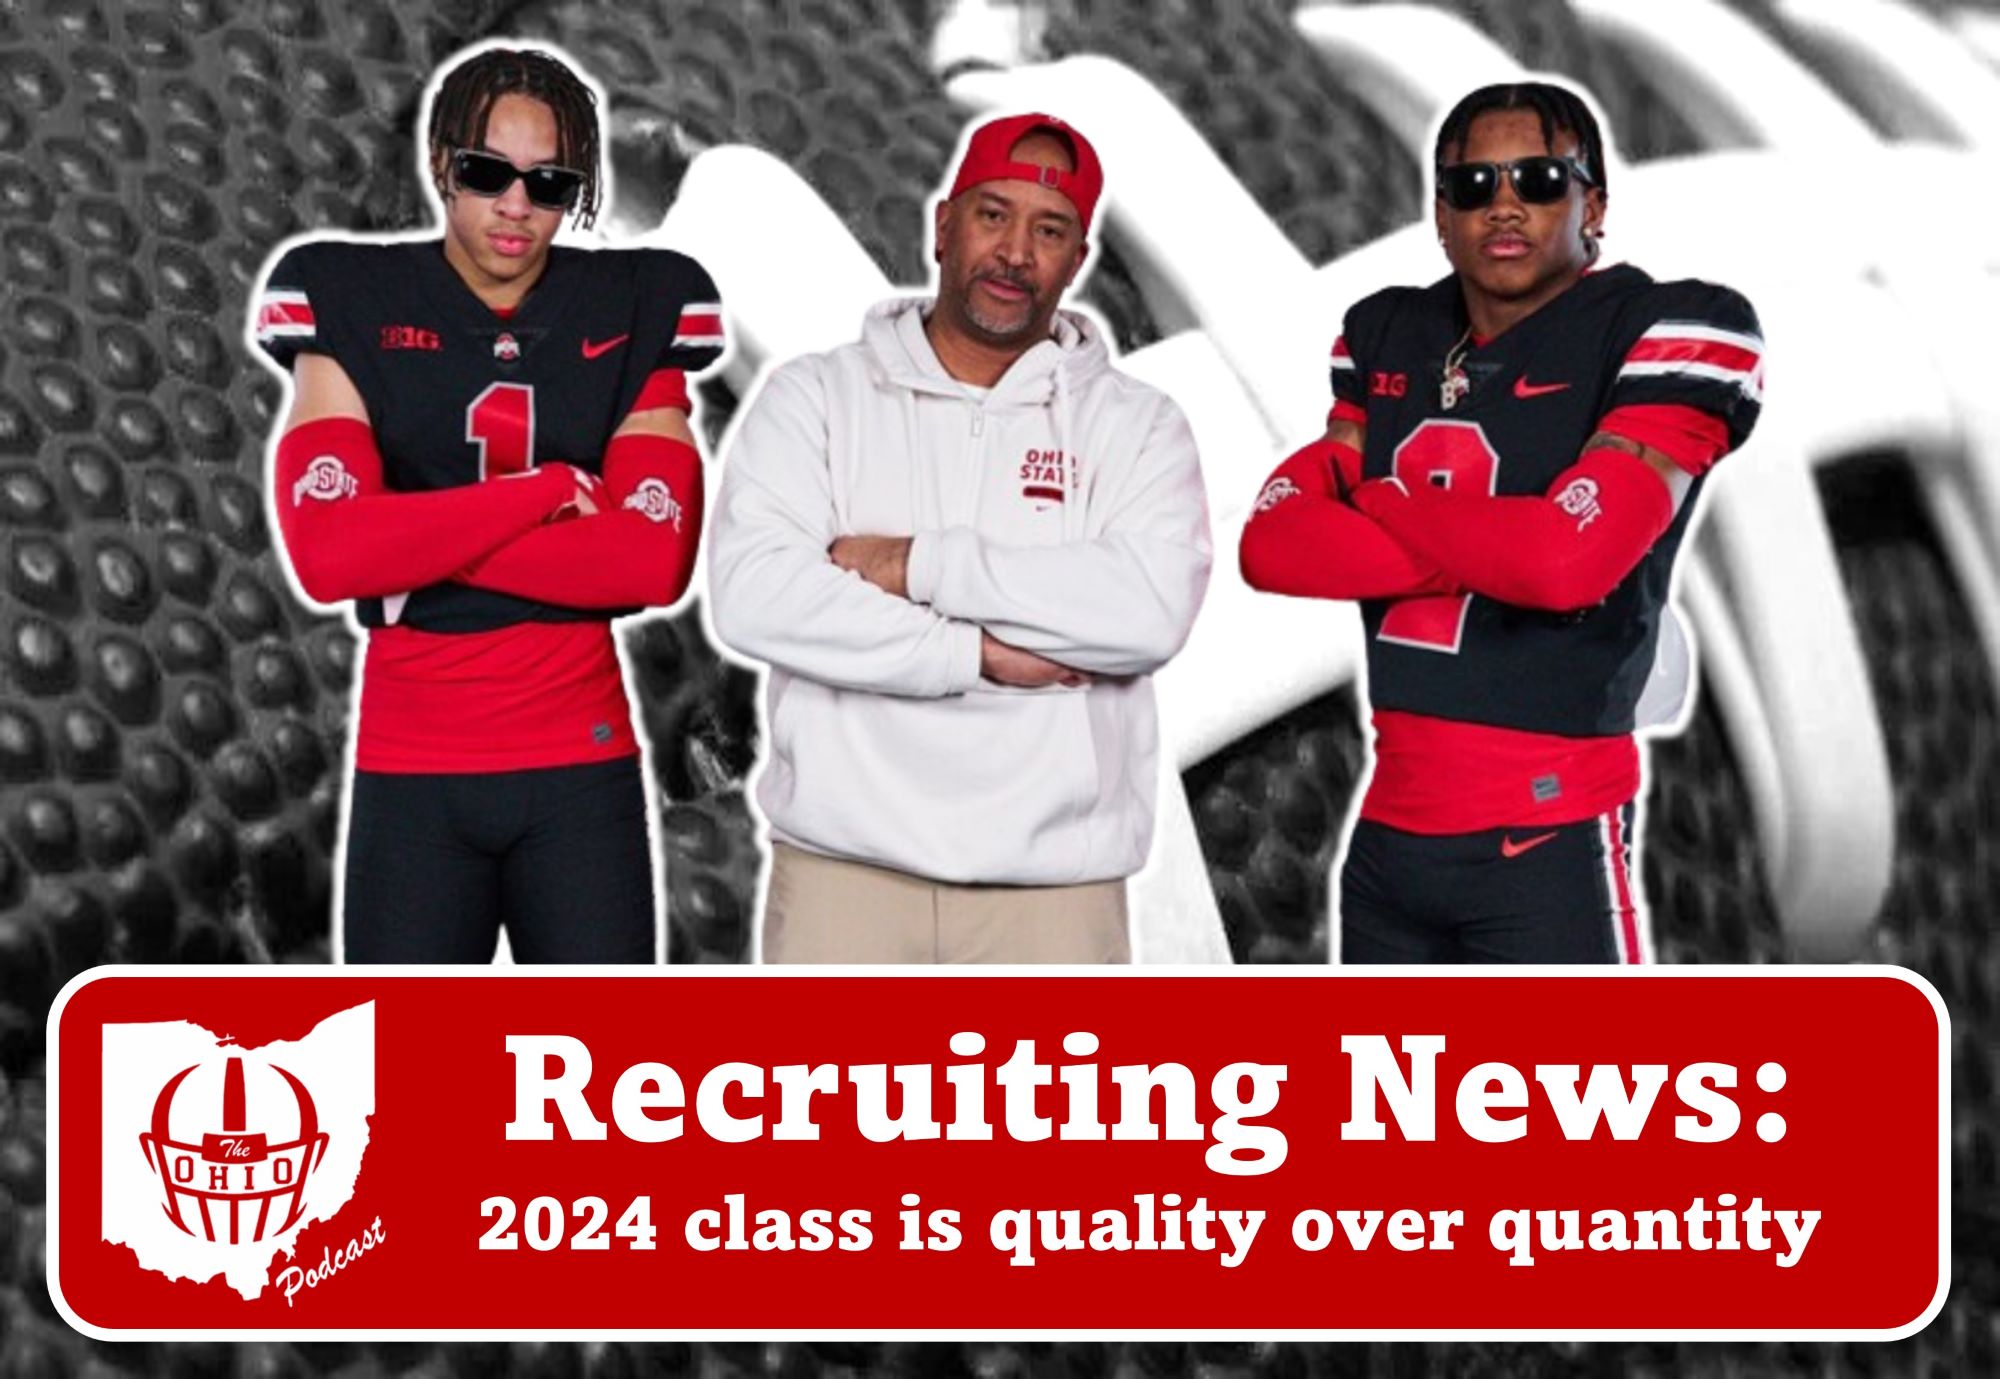 Ohio State’s 2024 Recruiting Class: Quality Over Quantity